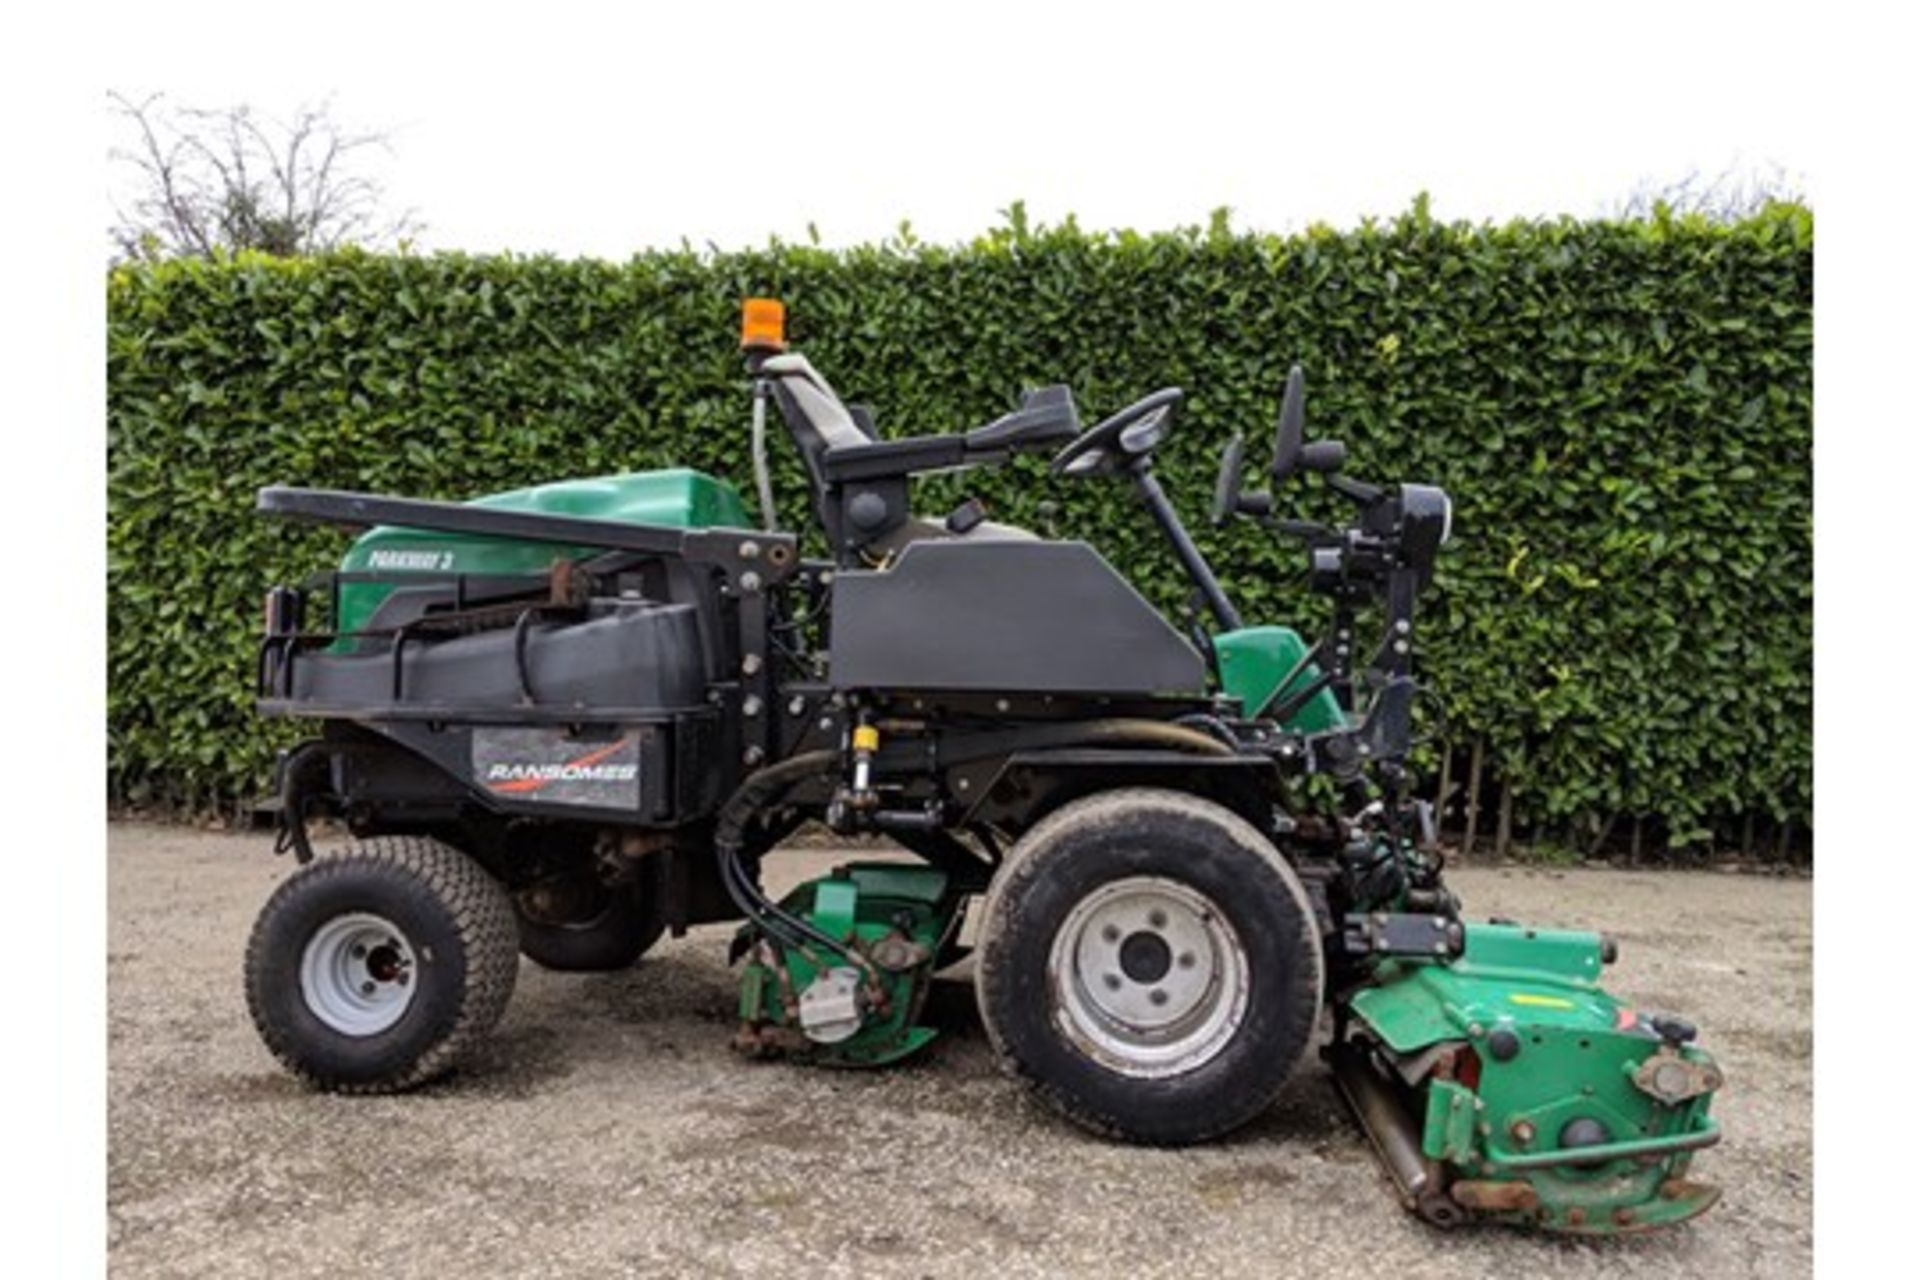 2012 Ransomes Parkway 3 4WD Triple Cylinder Mower - Image 7 of 8